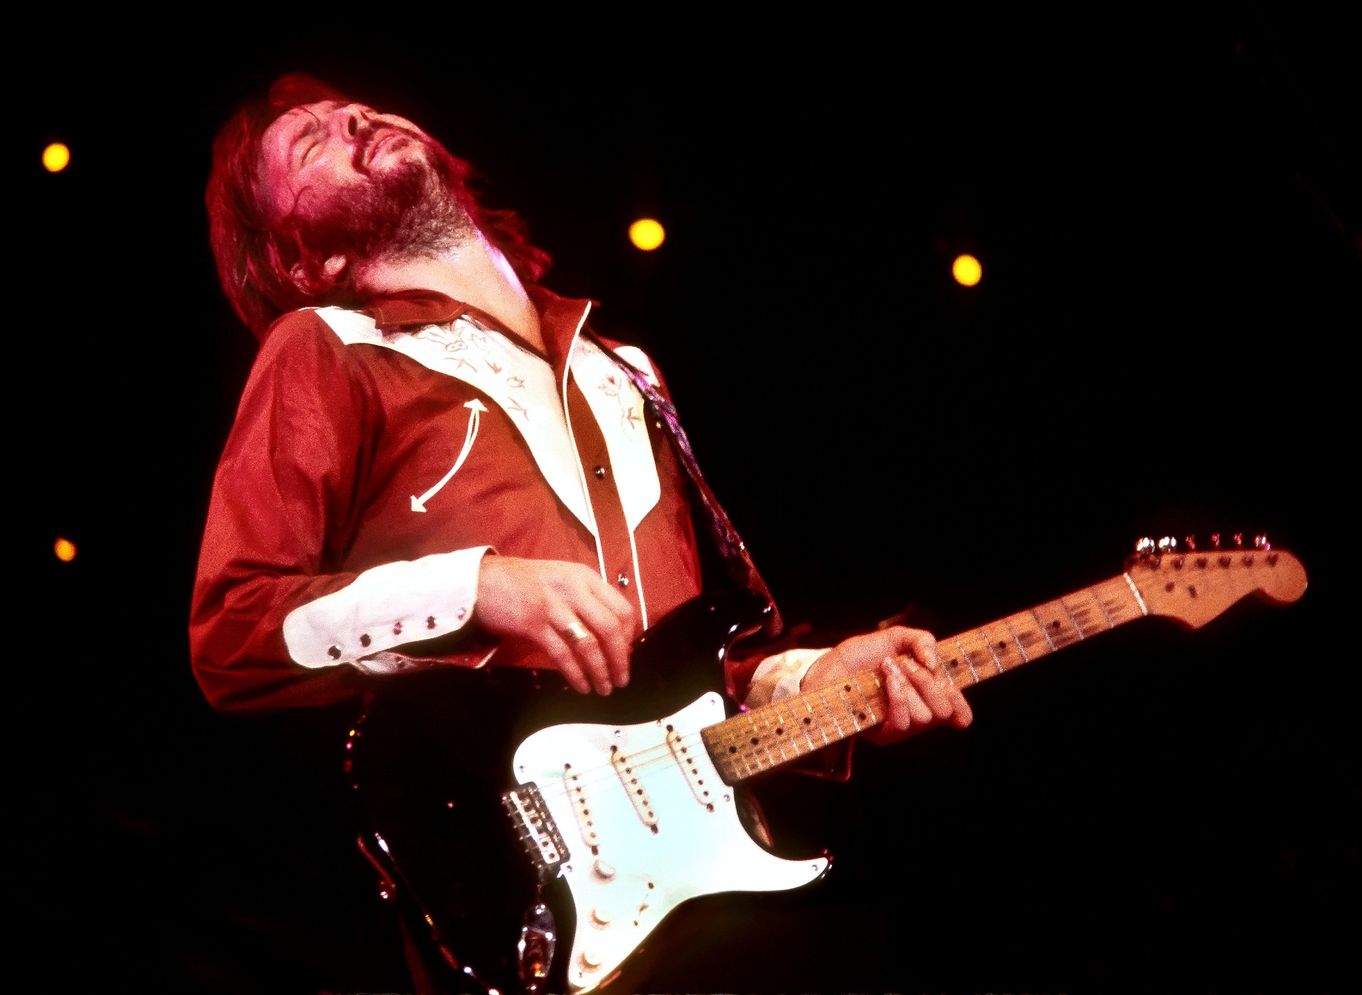 ERIC CLAPTON: A LIFE IN 12 BARS. Premiere and LIVE Q&A with ERIC CLAPTON